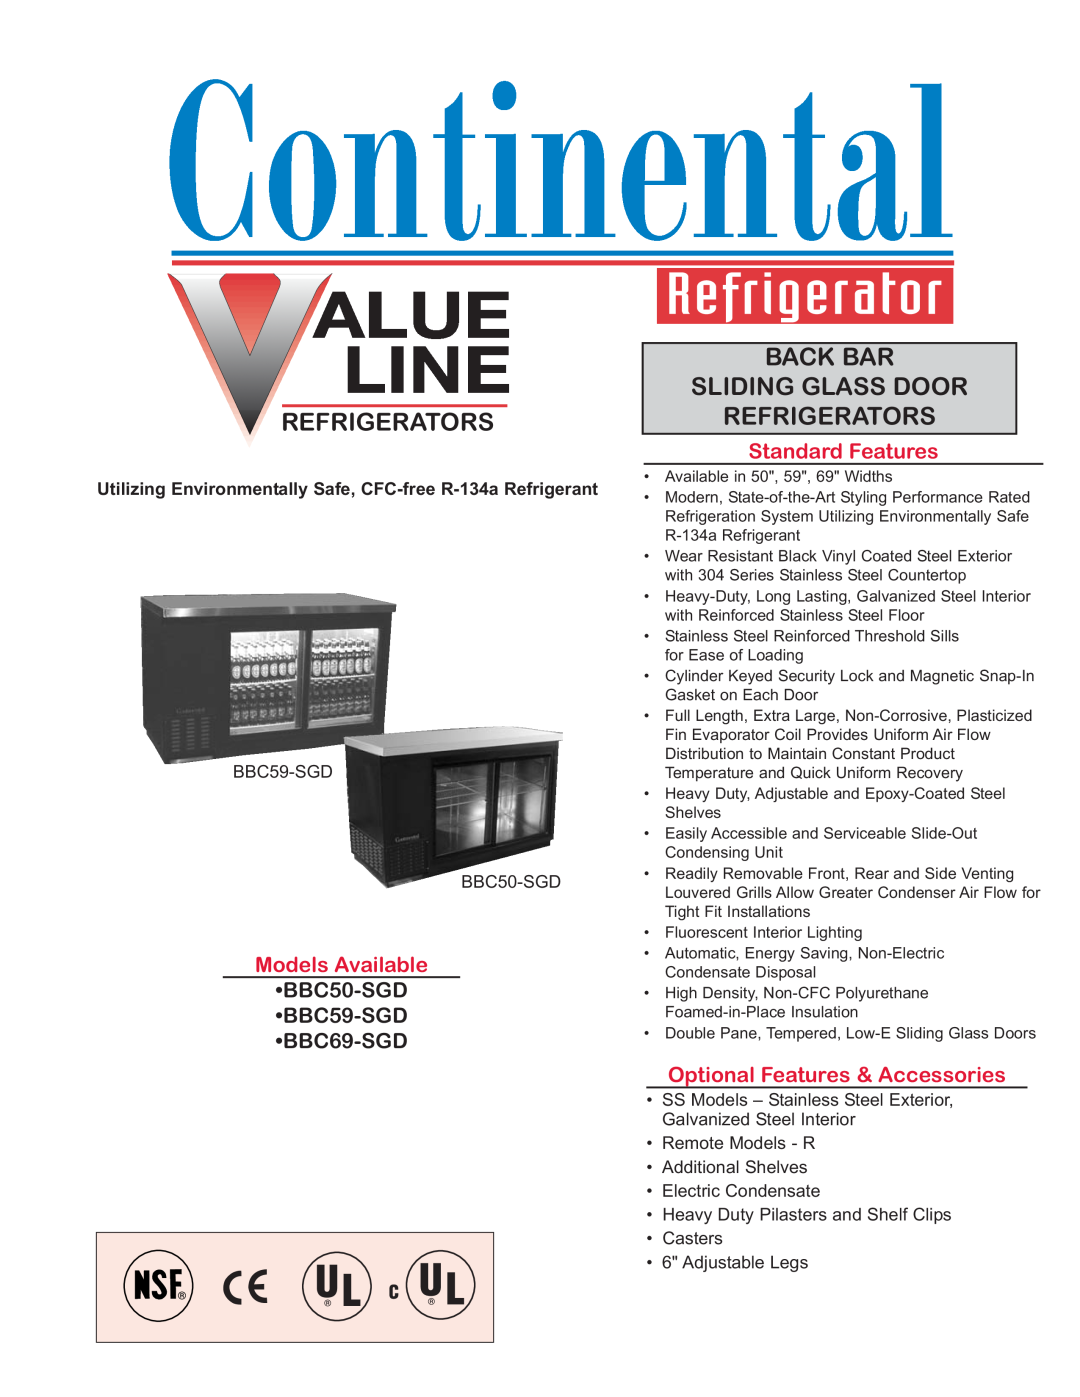 Continental Refrigerator R-134A manual Models Available, Standard Features, Optional Features & Accessories, Refrigerators 